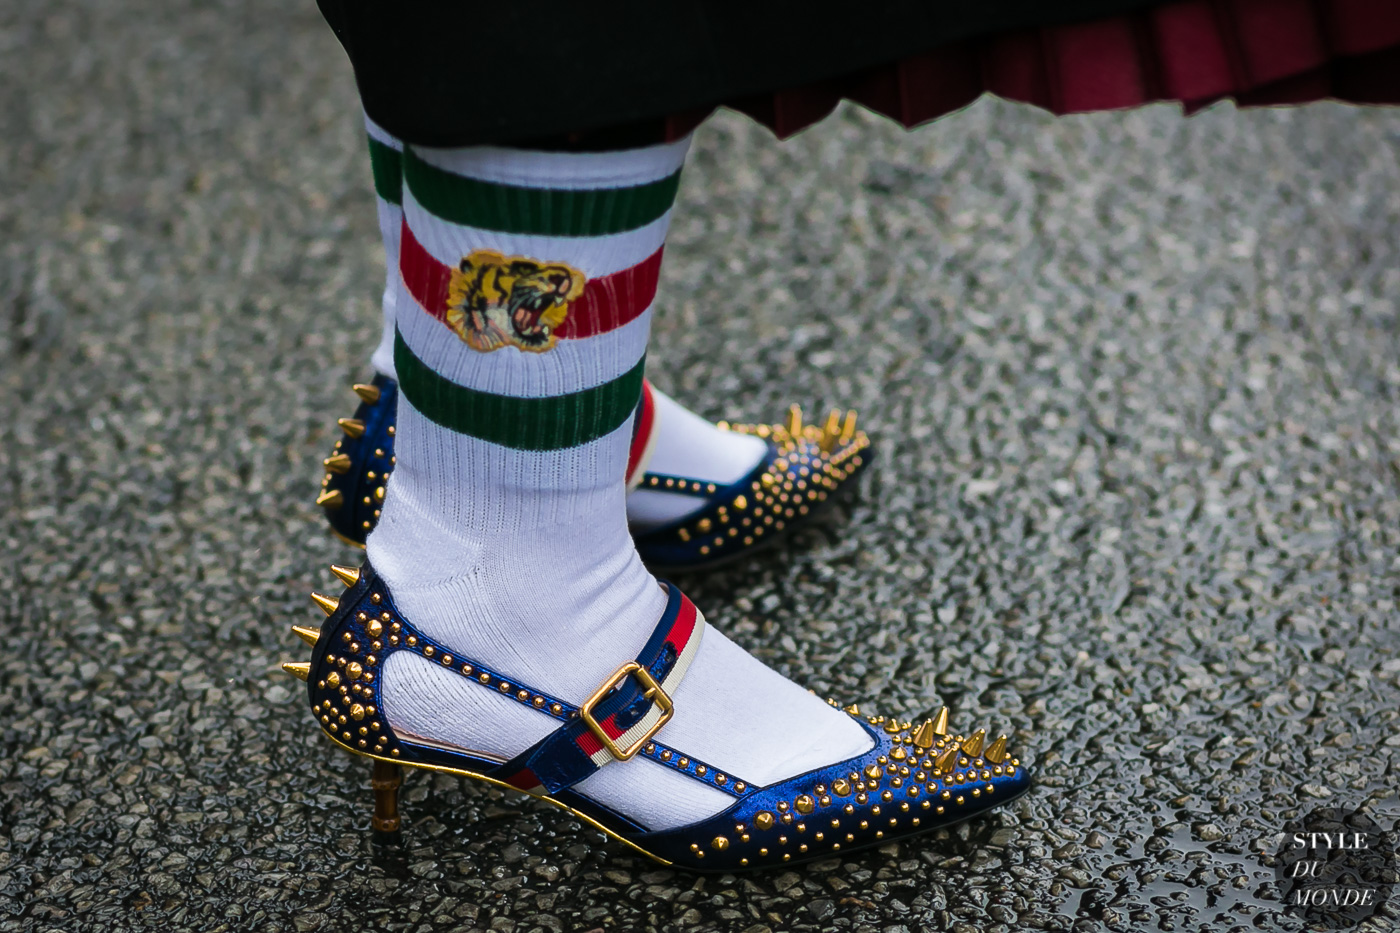 Gucci shoes and socks